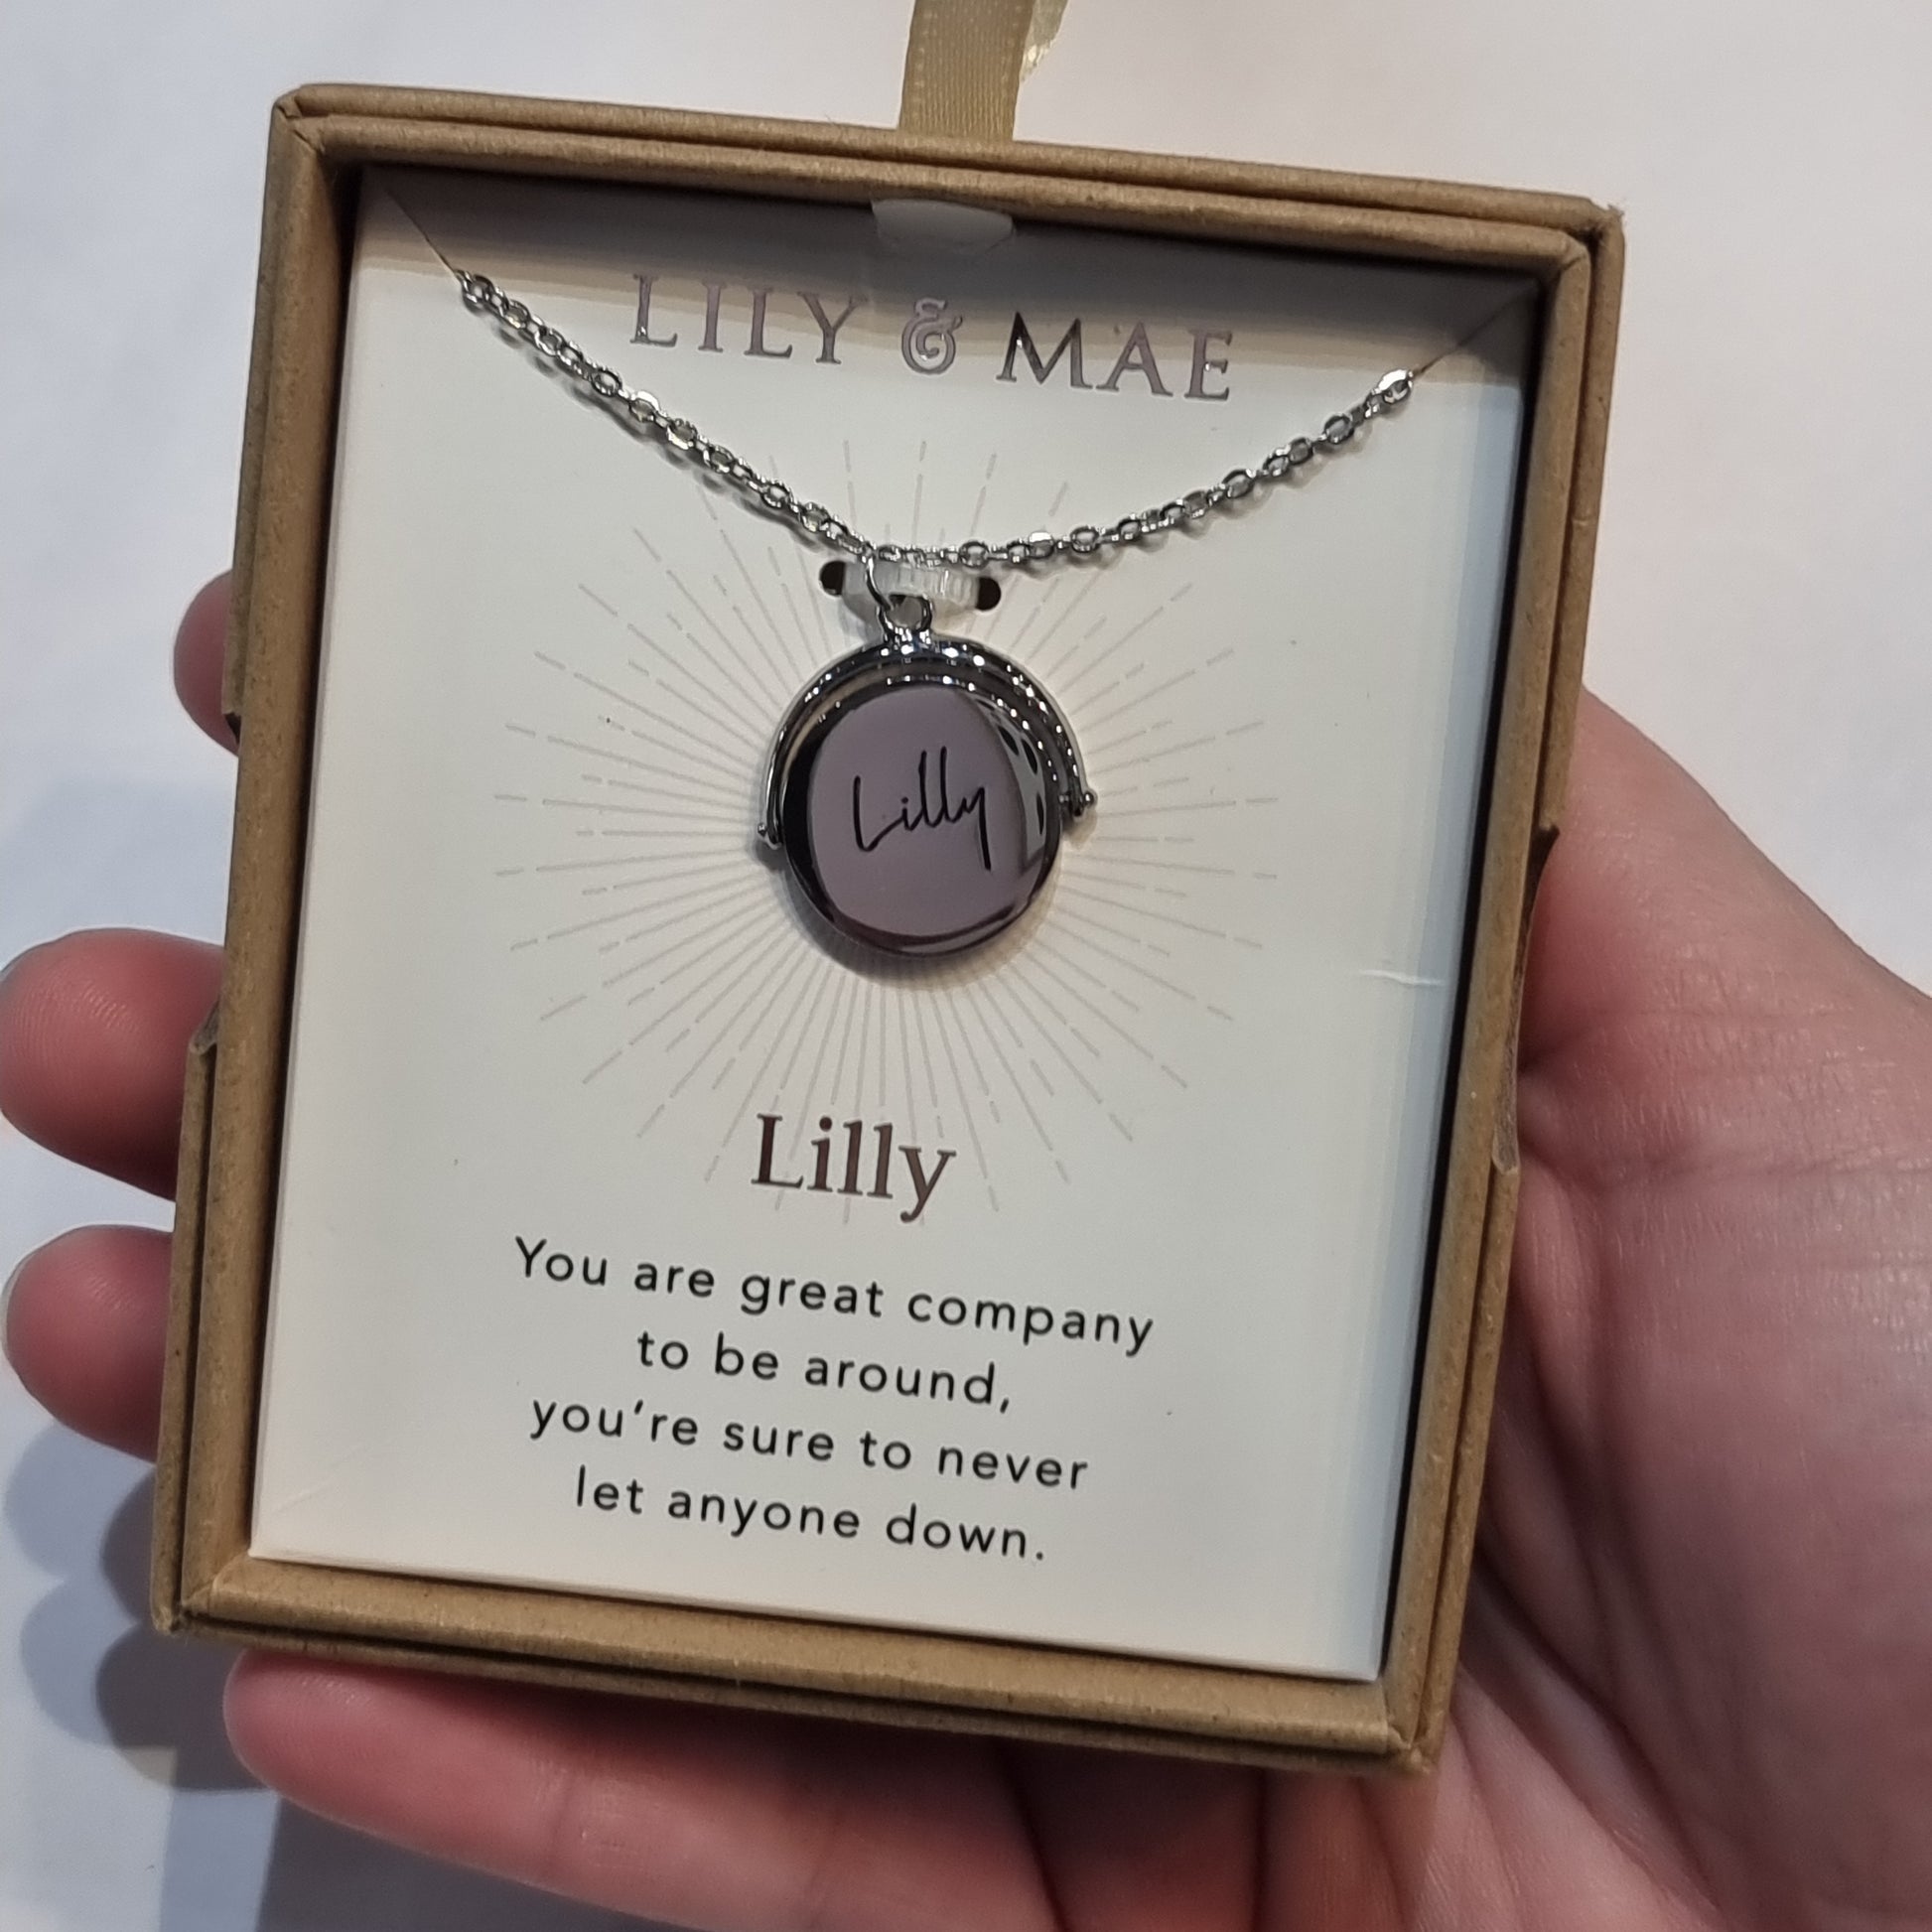 L&M spinning necklace - Lilly - Rivendell Shop